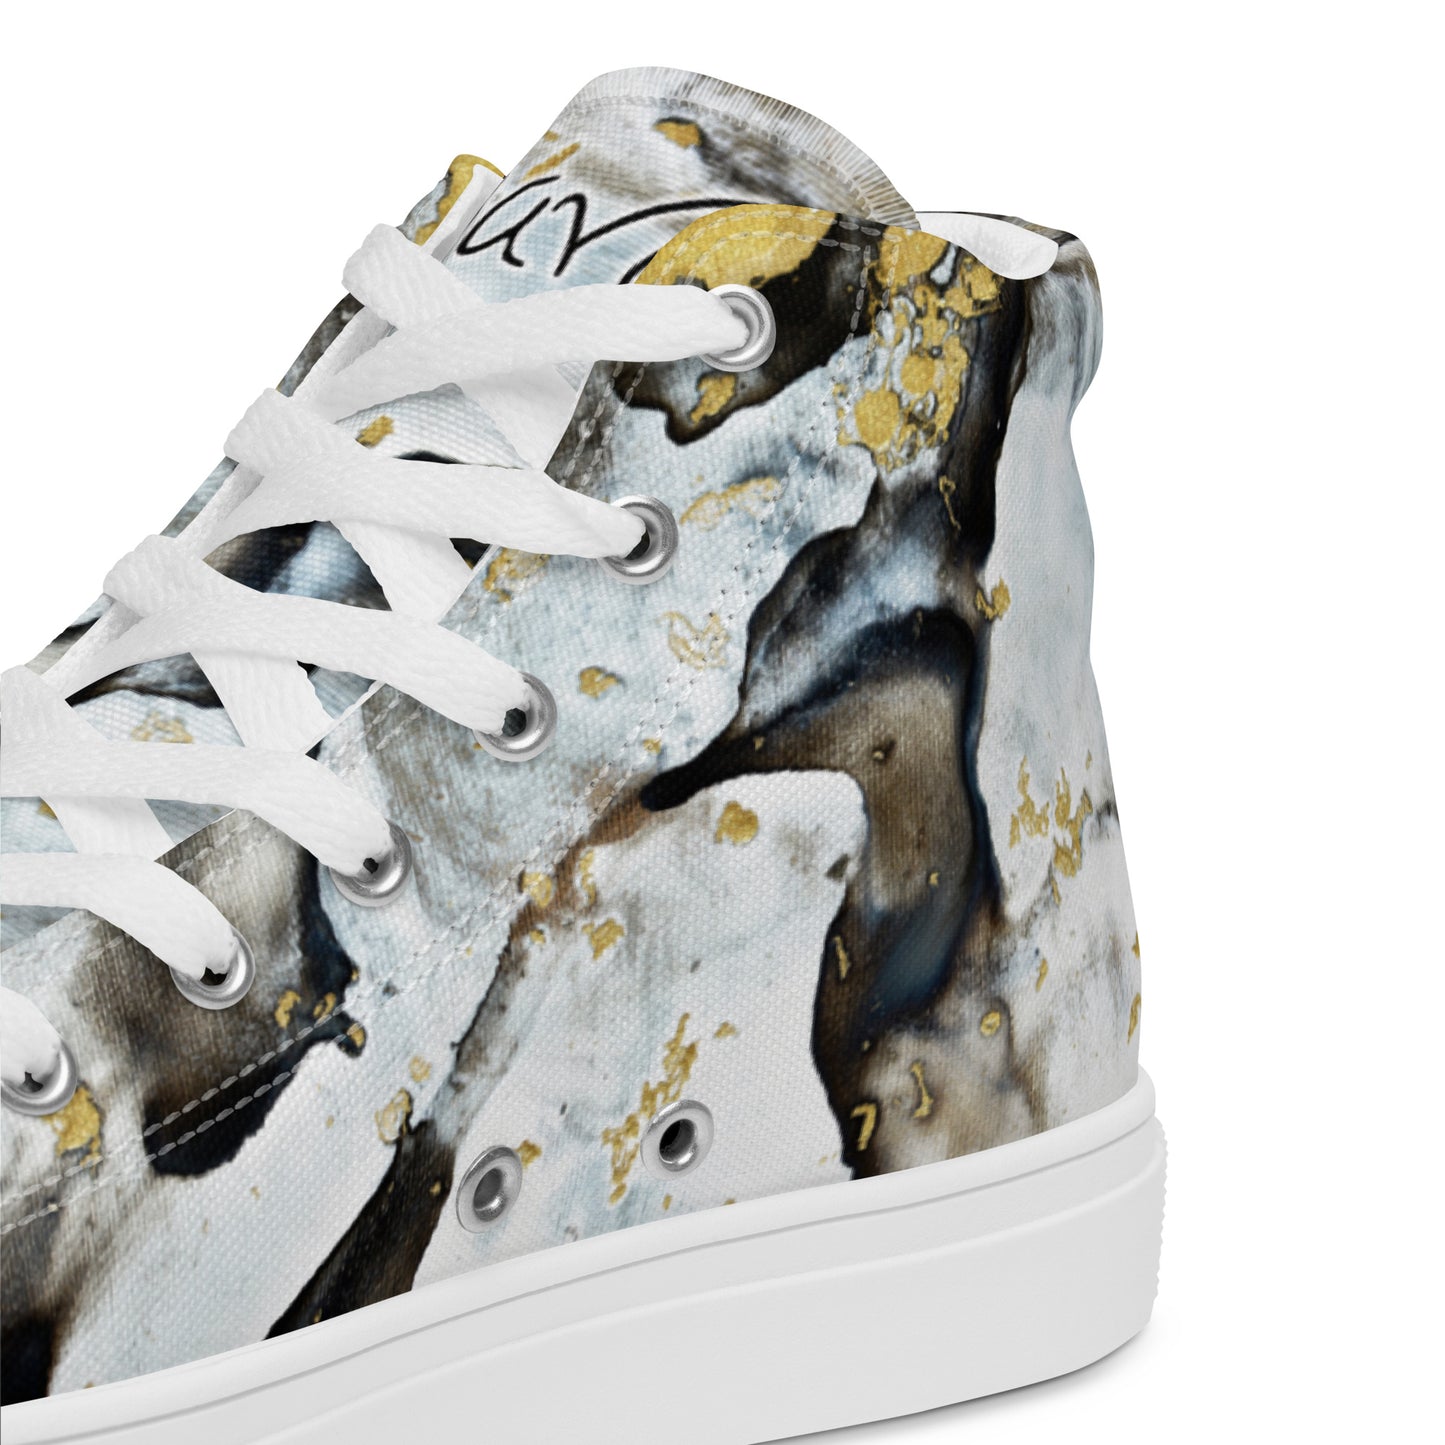 Women’s high top canvas shoes - Black and white design